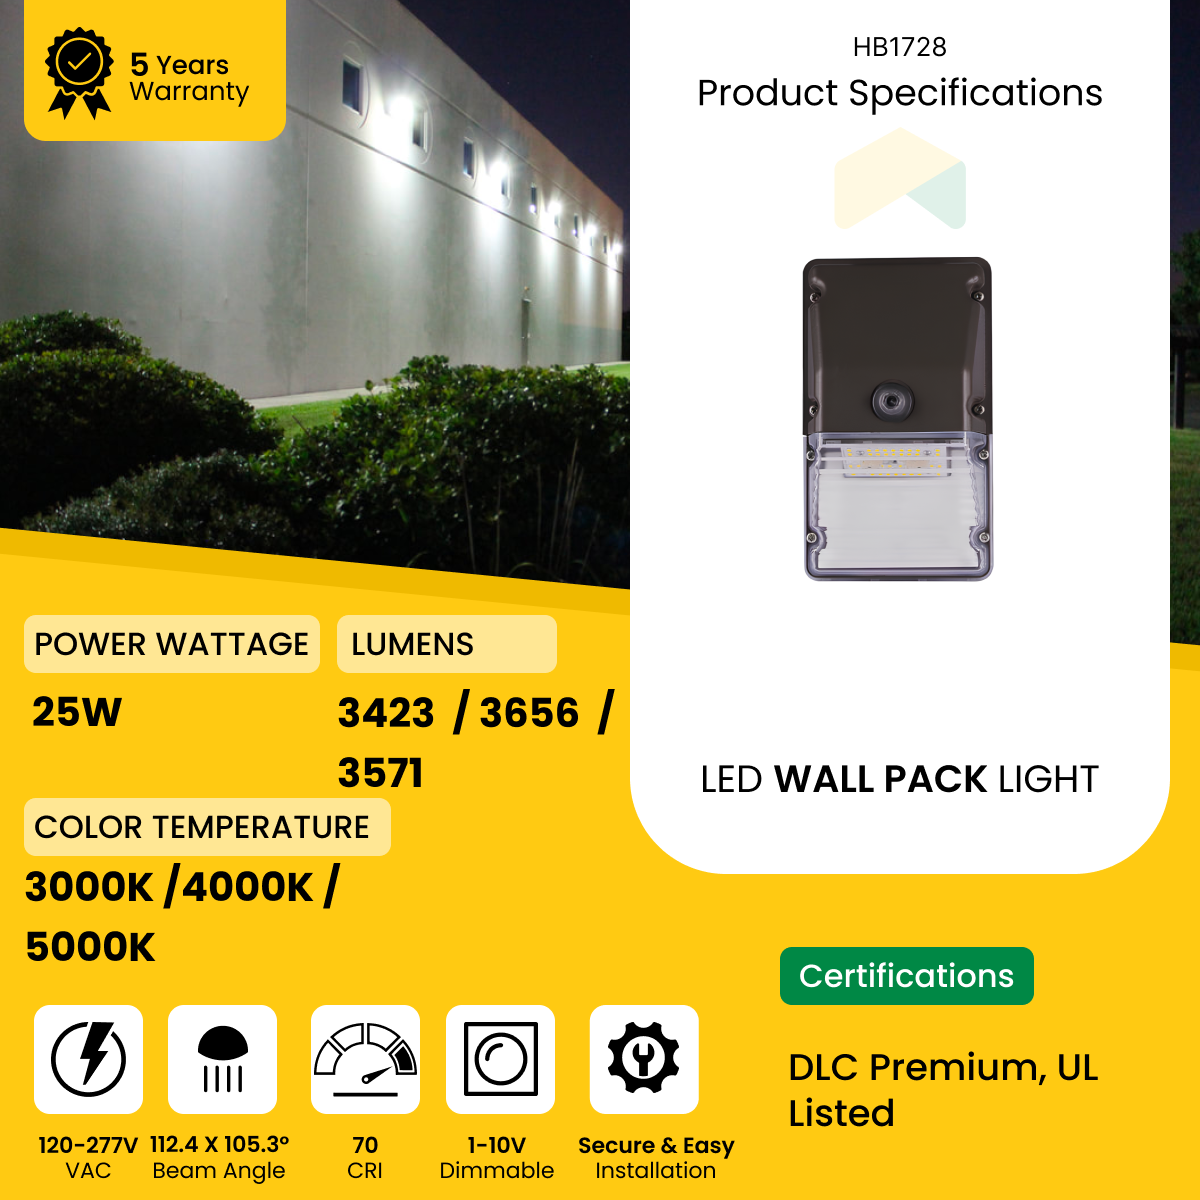 LED Wall Pack Light With Photocell, 25W, 3571 Lumens, 3000K/4000K/5000K CCT Selectable Included Photocell Equivalent, Waterproof Commercial Security Lighting for Warehouses, Garage,ETL Listed